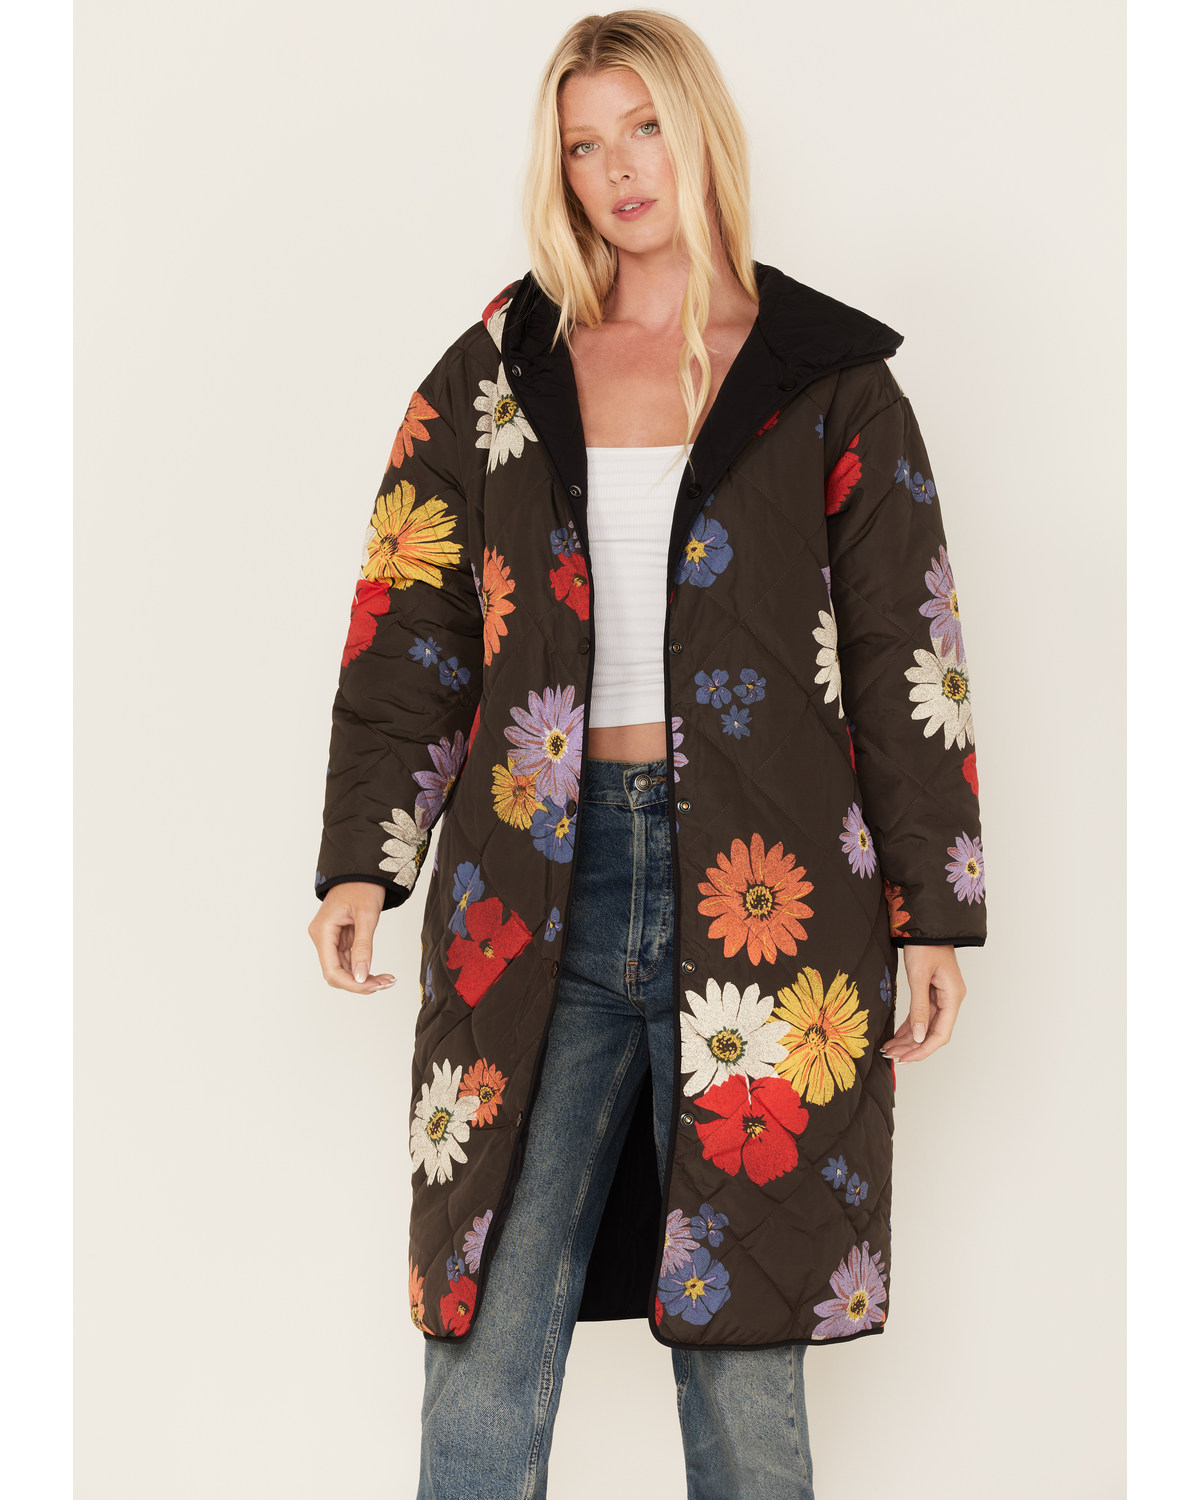 Wrangler Women's Floral Print Reversible Quilted Hooded Jacket